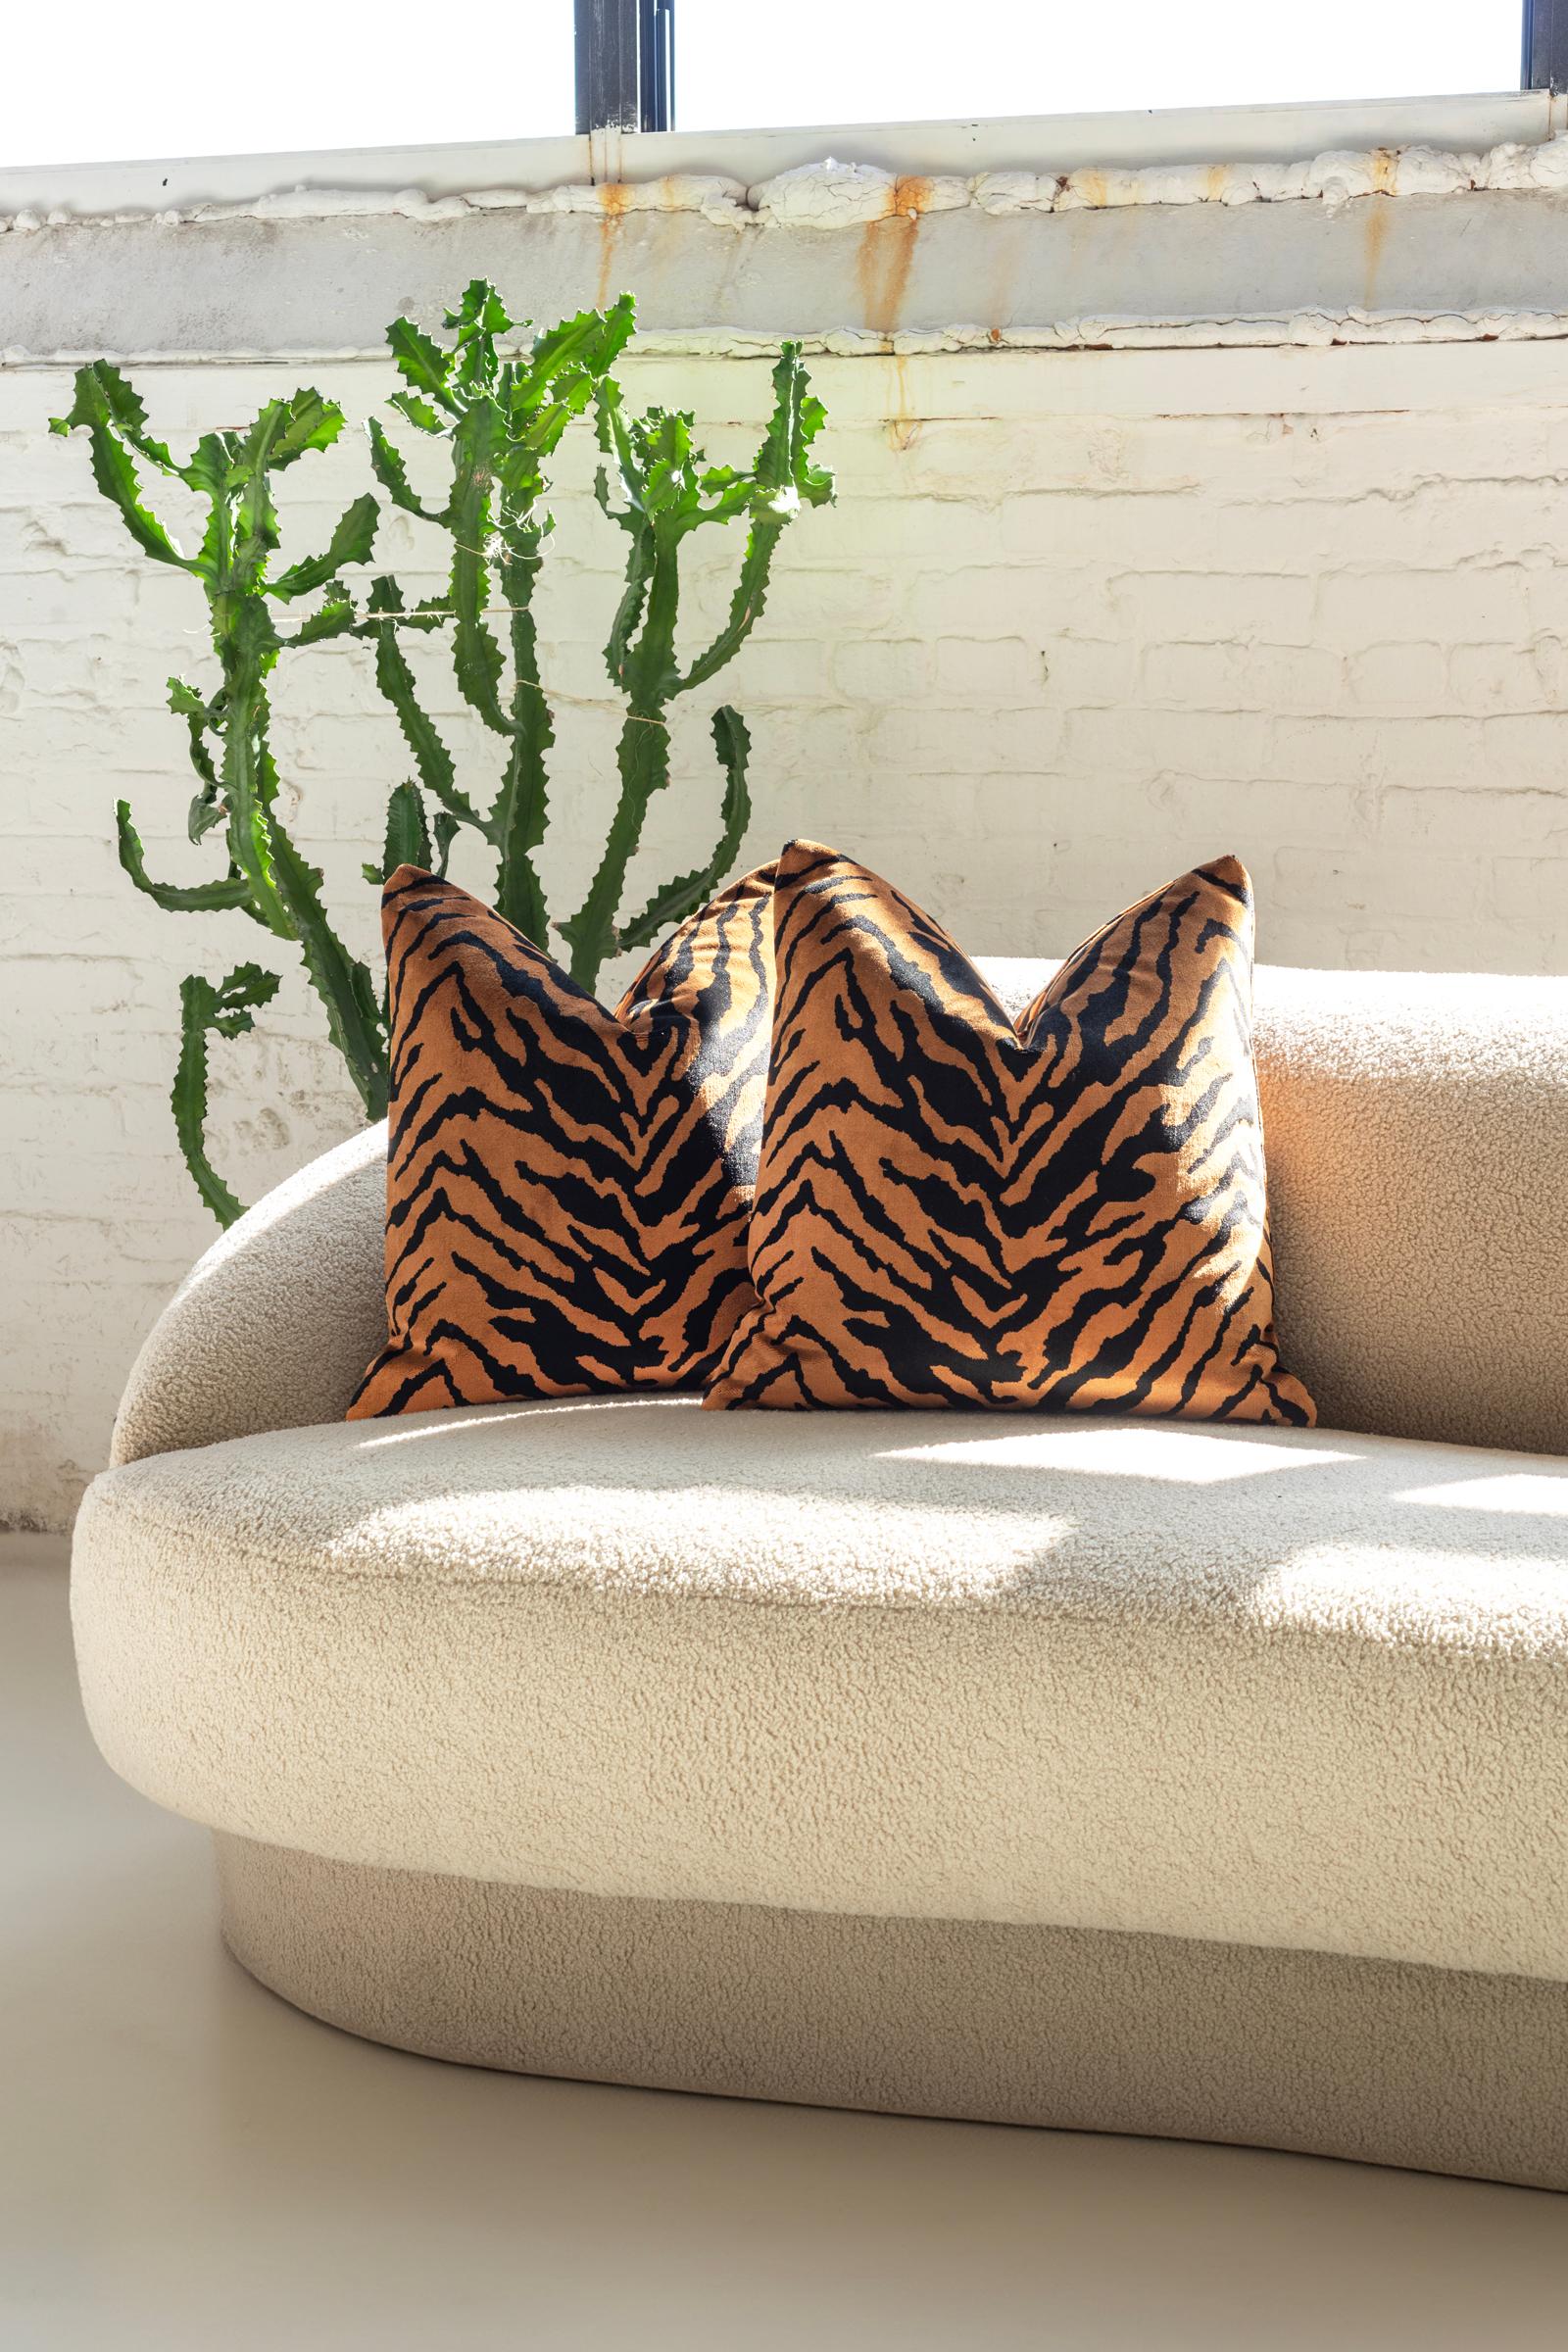 Hand crafted in Chicago, these Belgium velvet throw pillows redefine luxury with their plush texture and striking tiger design. The premium velvet, known for its unparalleled softness, wraps each down pillow on both sides in a layer of unmatched